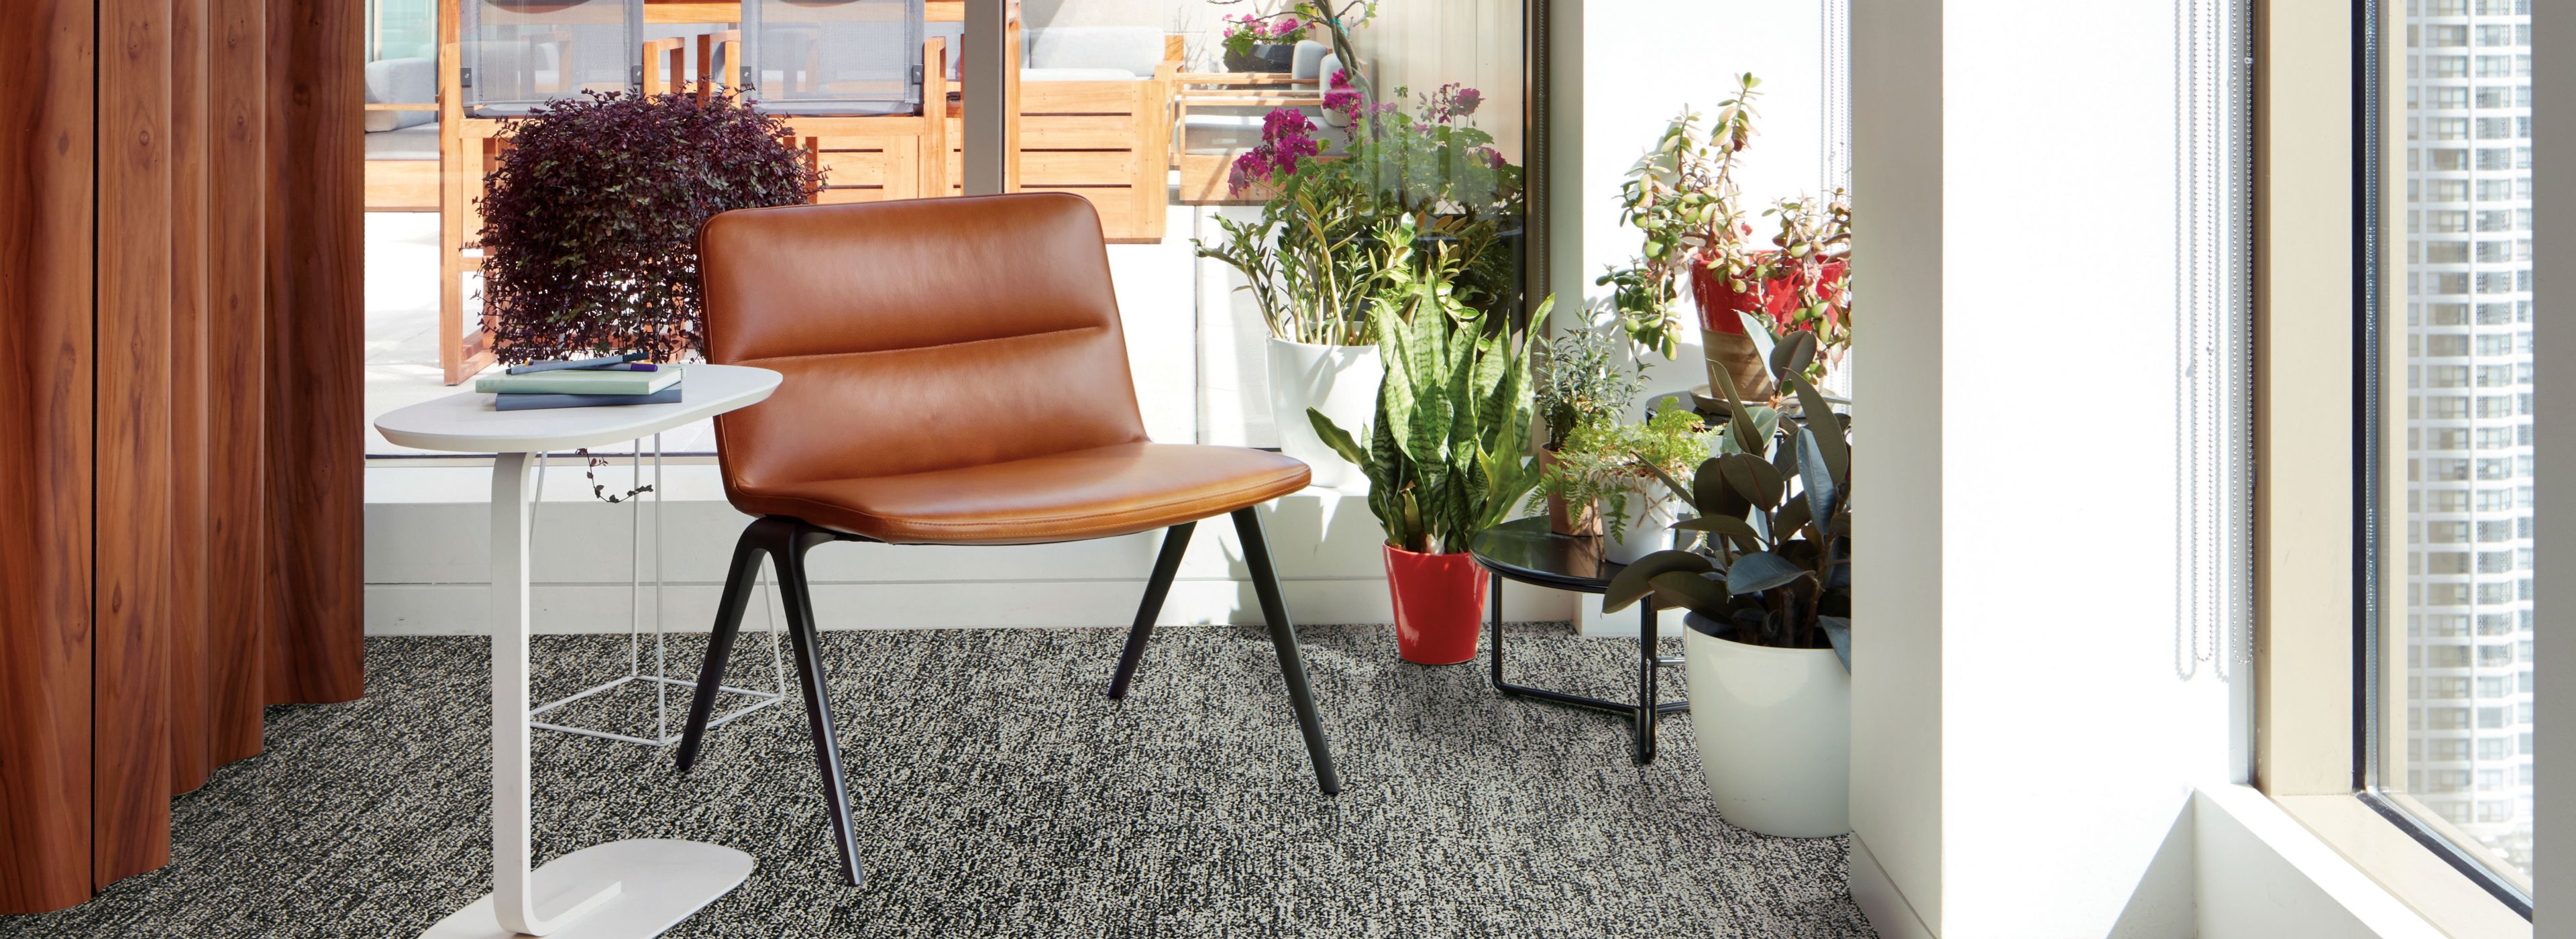 Interface Obligato plank carpet tile with leather chair and potted plants in windows numéro d’image 1